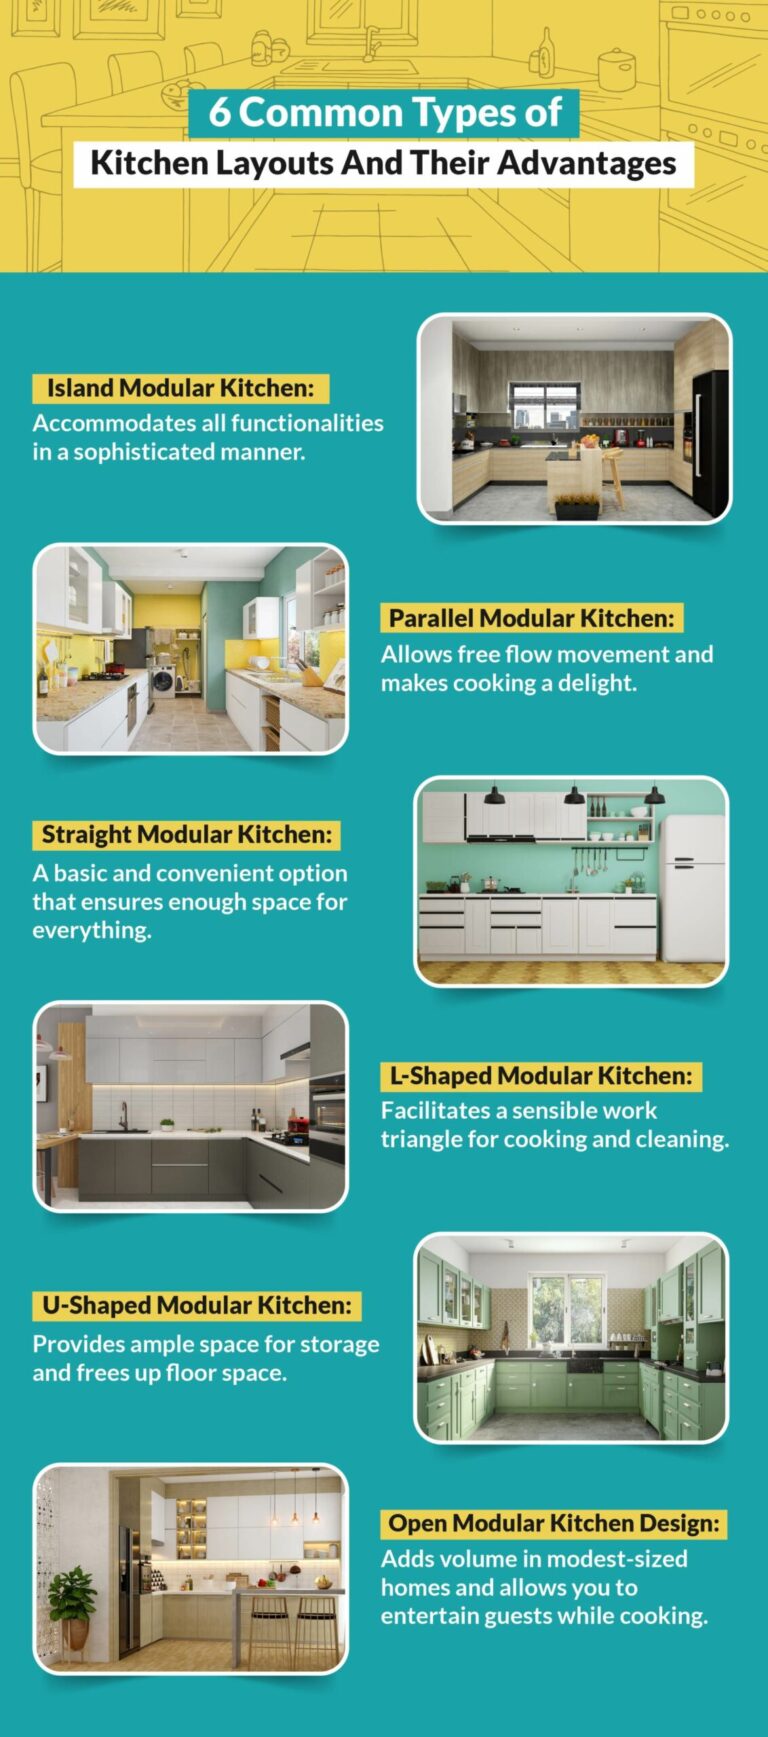 What Are The 5 Types Of Kitchens?